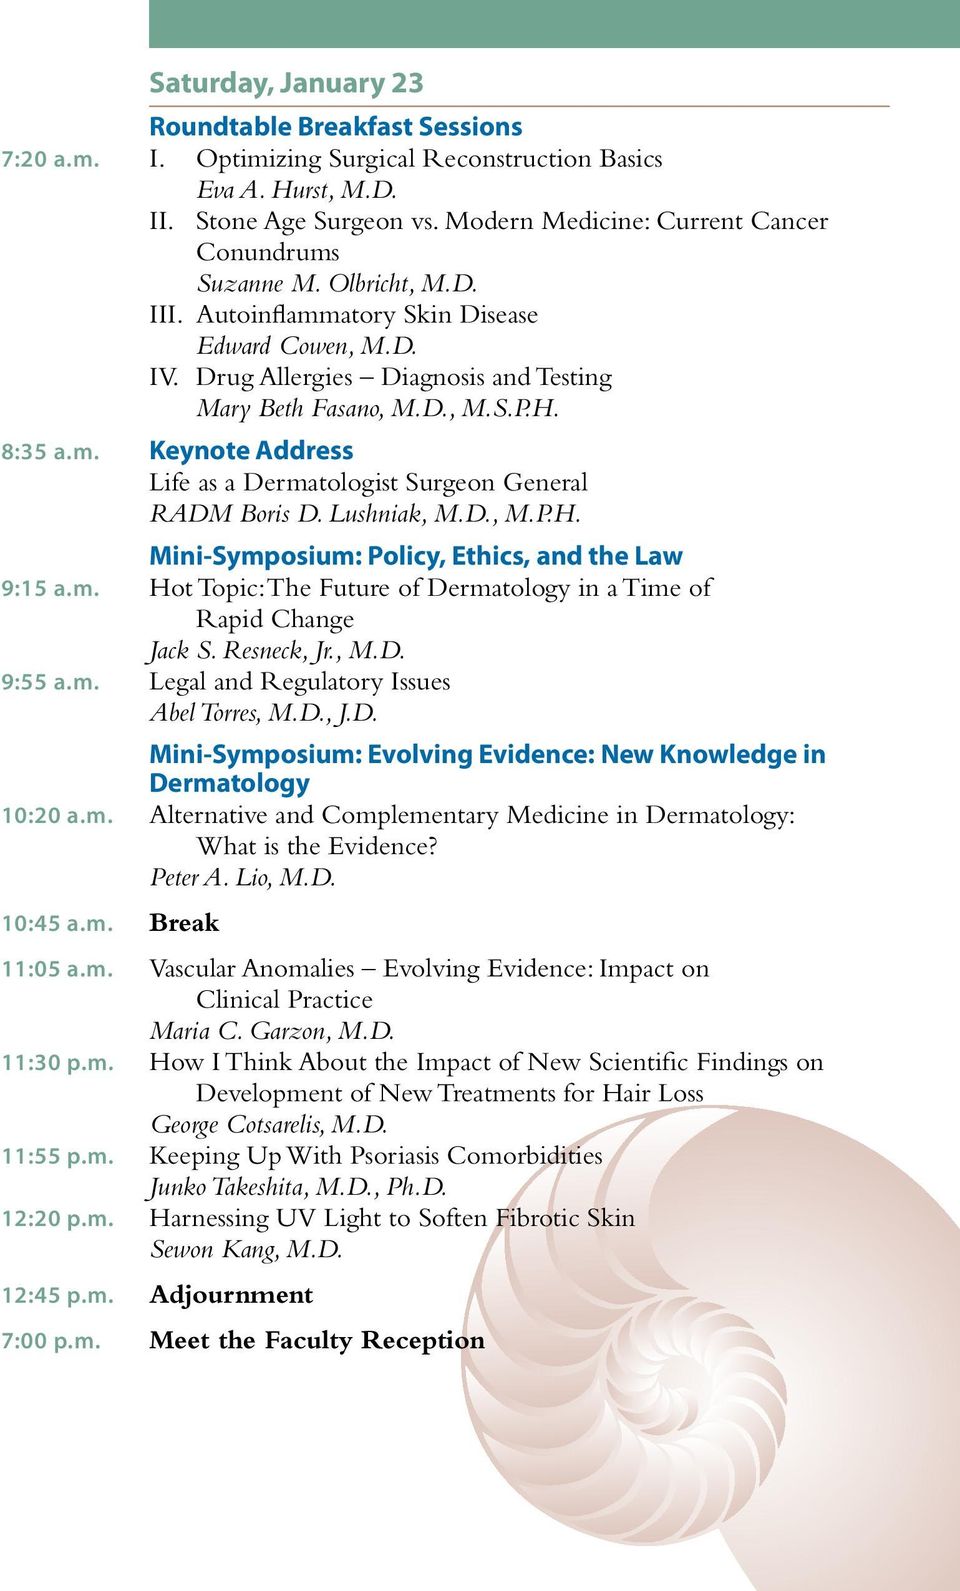 8:35 a.m. Keynote Address Life as a Dermatologist Surgeon General RADM Boris D. Lushniak, M.D., M.P.H. Mini-Symposium: Policy, Ethics, and the Law 9:15 a.m. Hot Topic: The Future of Dermatology in a Time of Rapid Change Jack S.